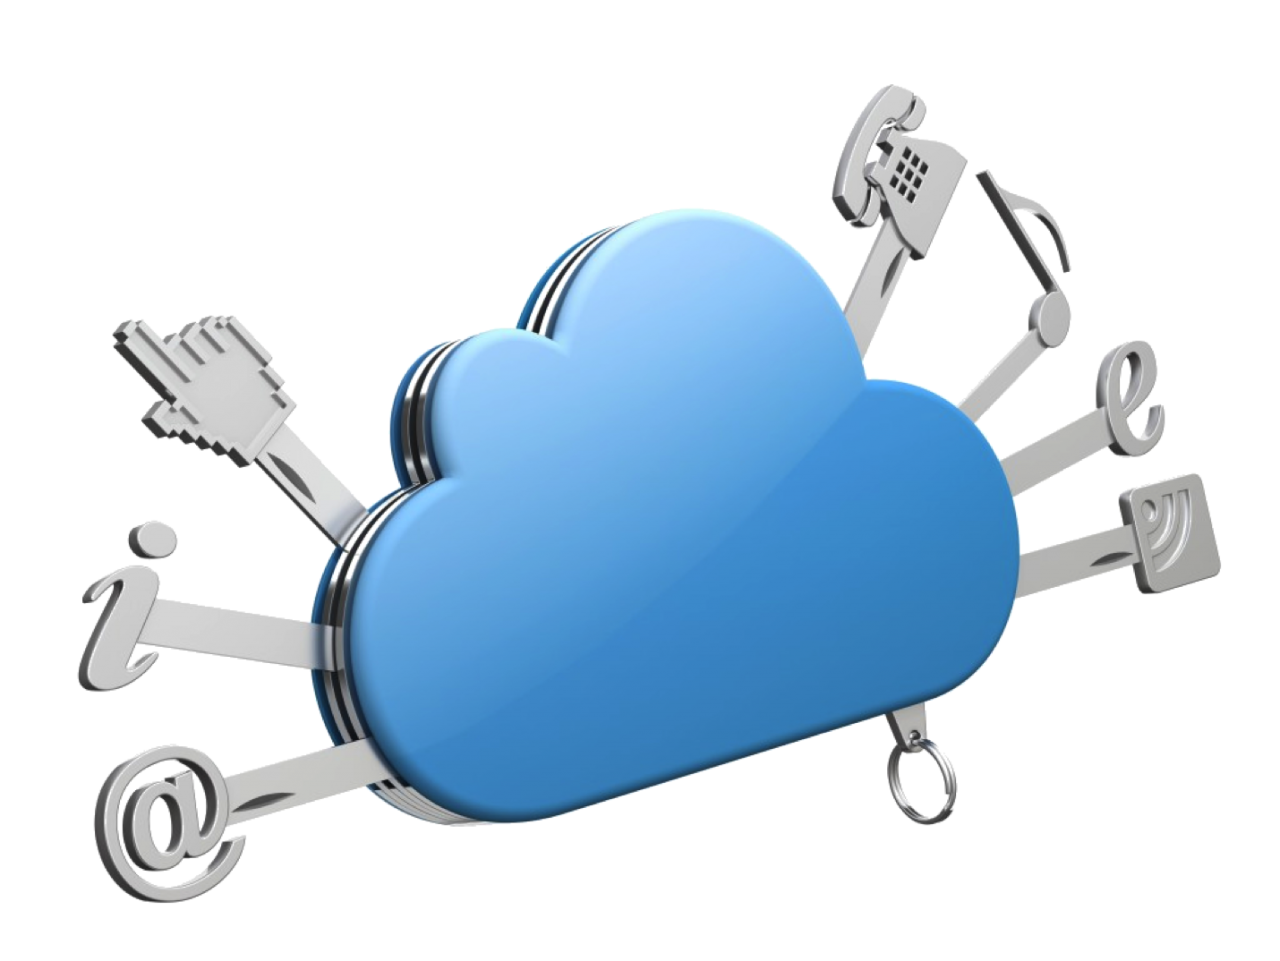 Business Continuity and the Cloud